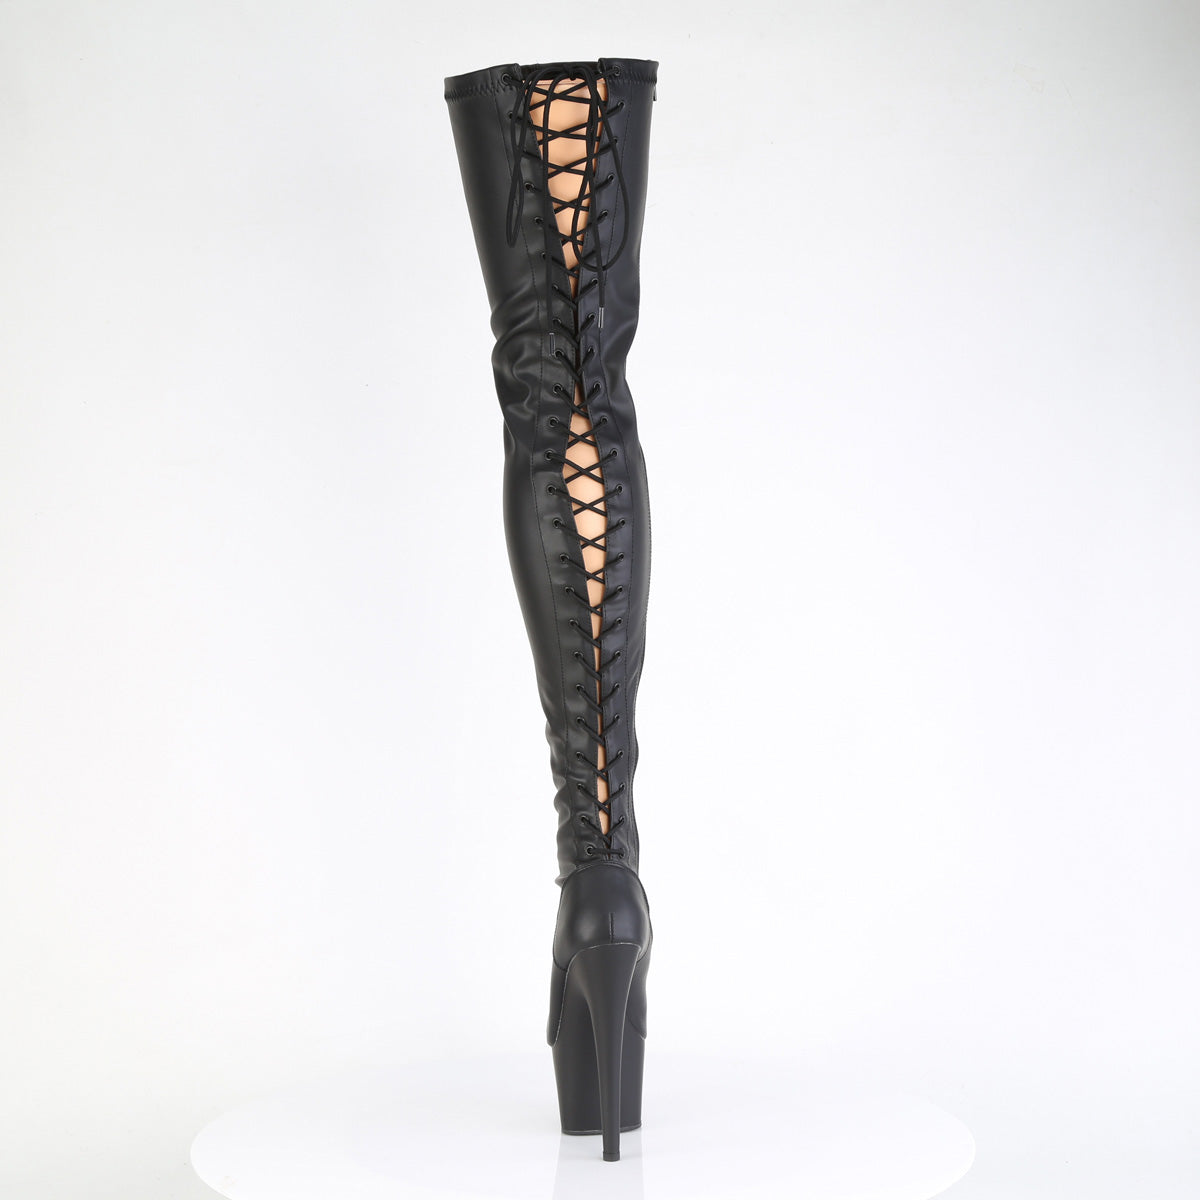 ADORE-3850 Pleaser 7 Inch Black Exotic Dancing Thigh High Boots